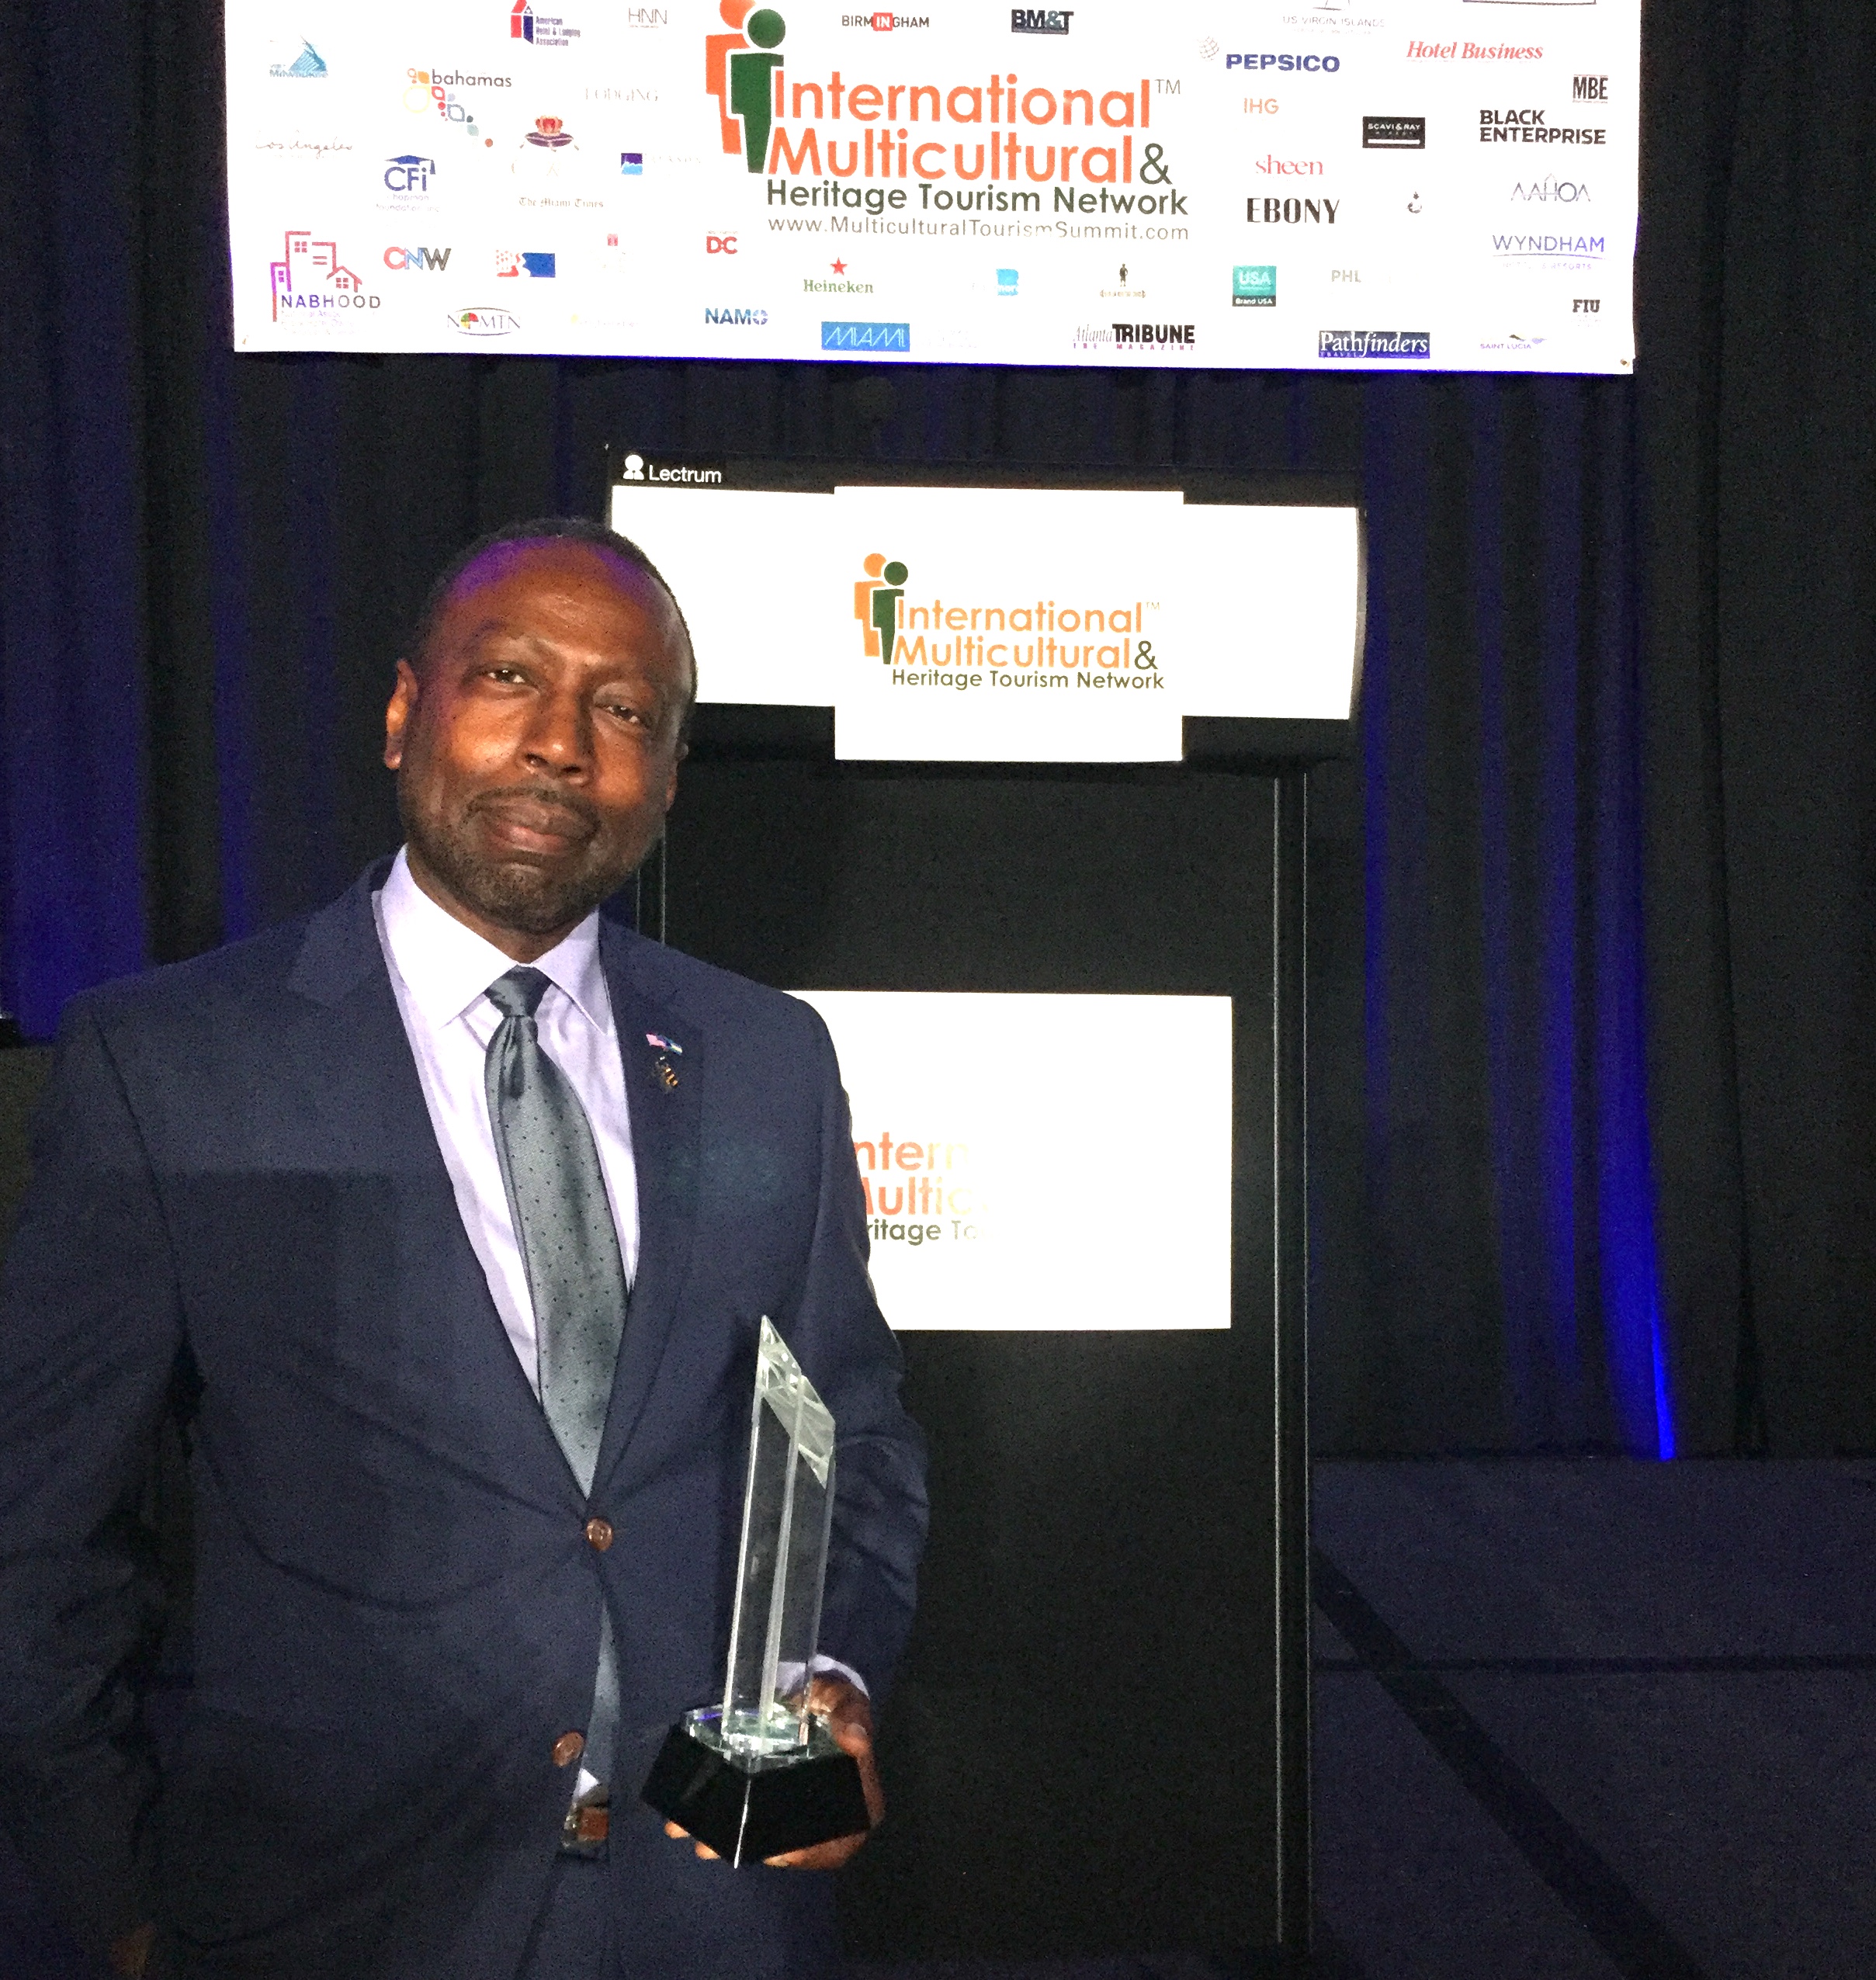 Linville Johnson, responsible for the Multicultural Department of The Bahamas Ministry of Tourism and Aviation is pictured with his Apex Award, received from Black Meetings and Tourism's Magazine for his outstanding contributions to the Hospitality and To